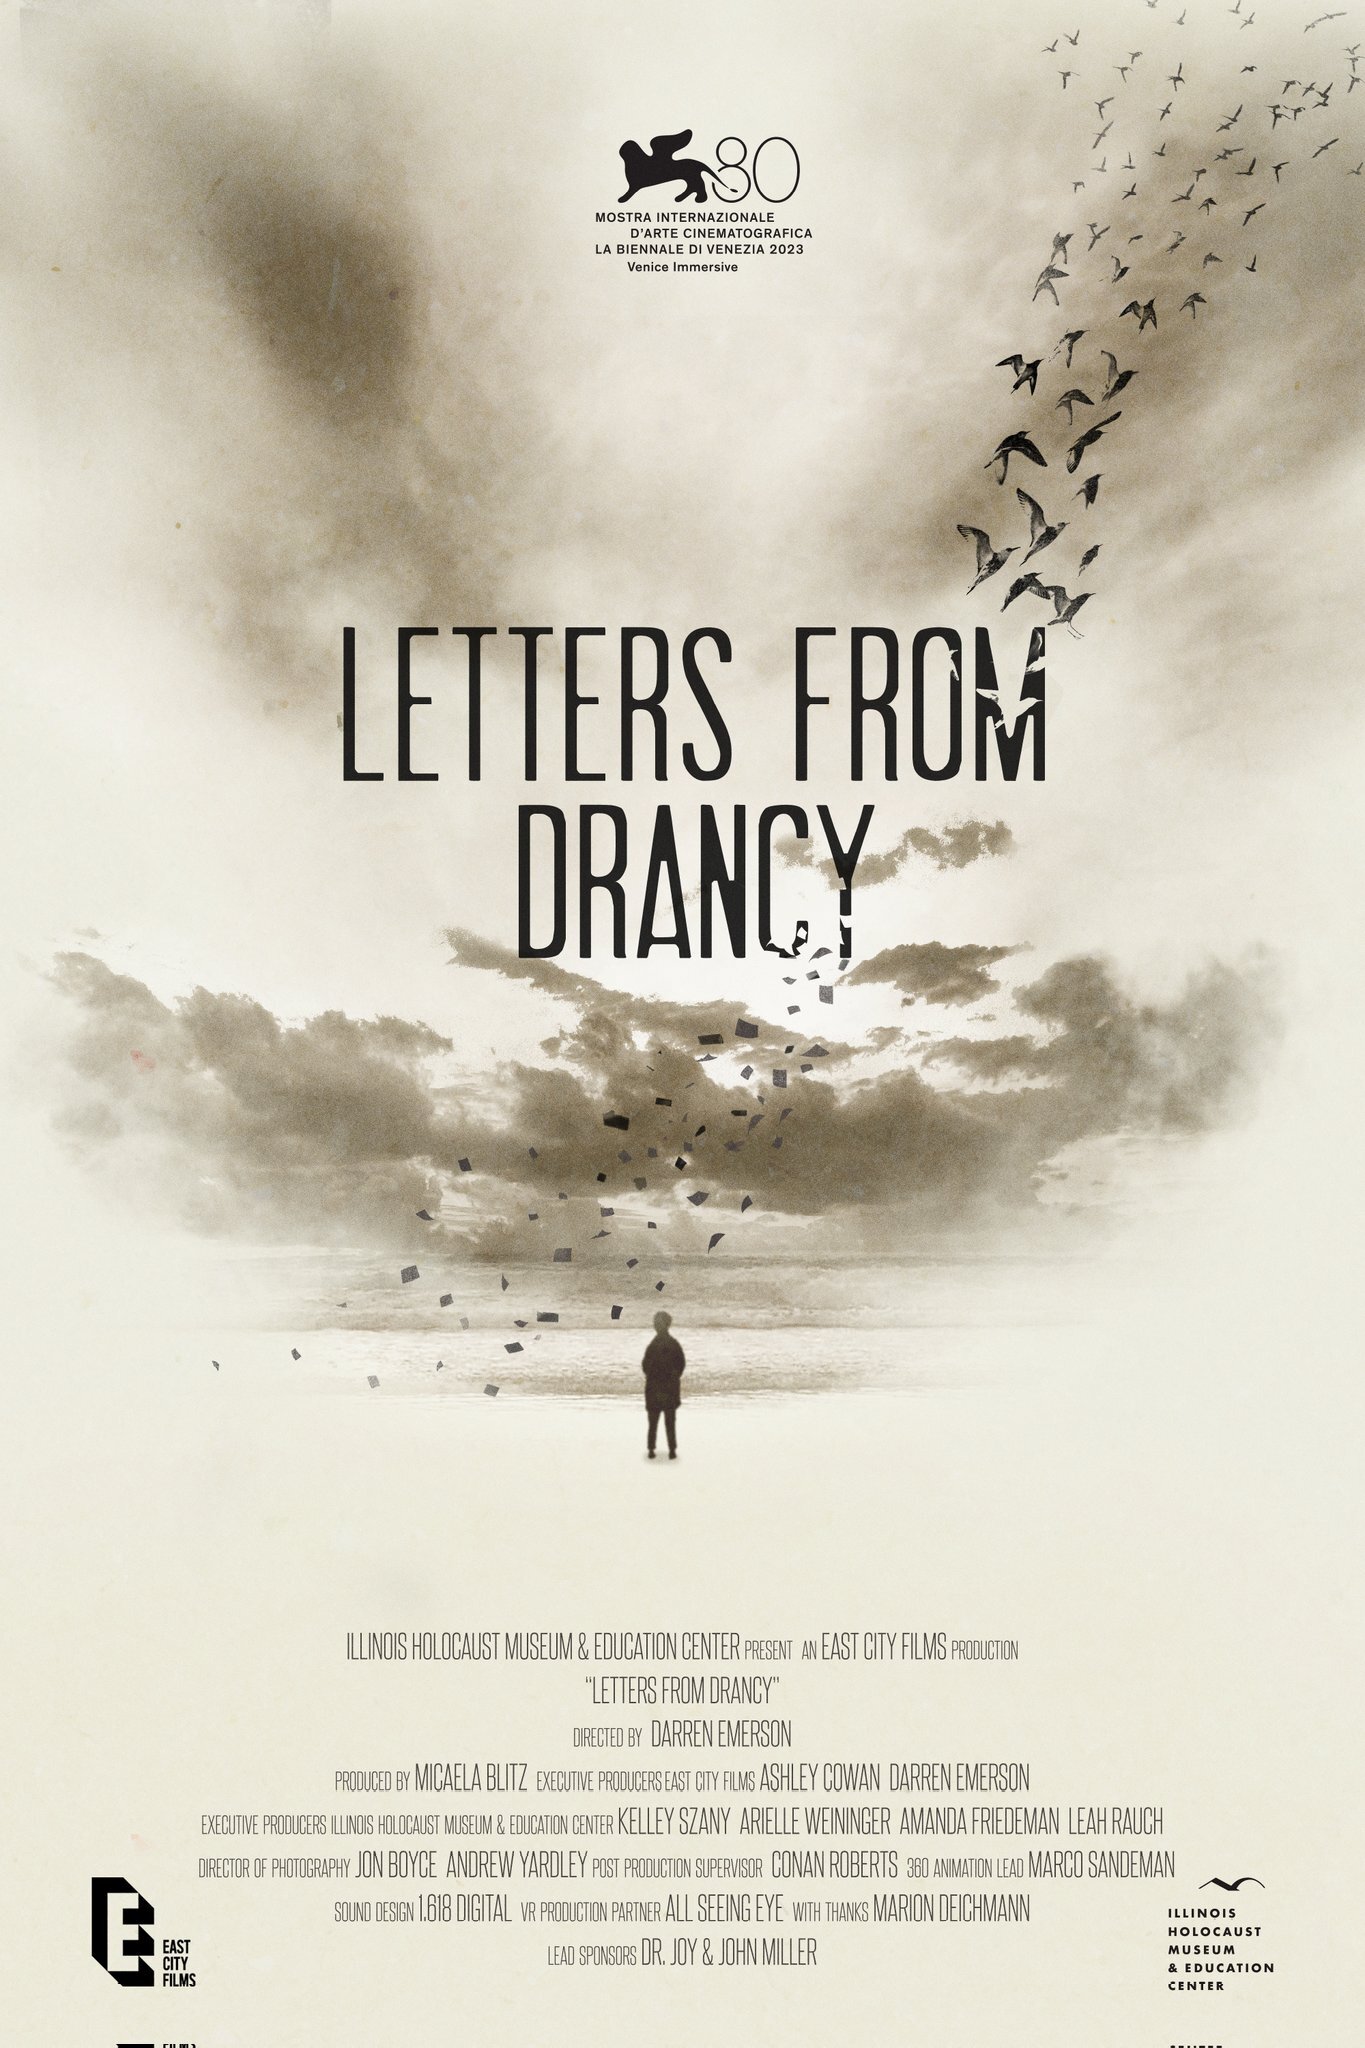 ‘Letters from Drancy’ VR experience world-premiered at the 80th International Venice Film Festival